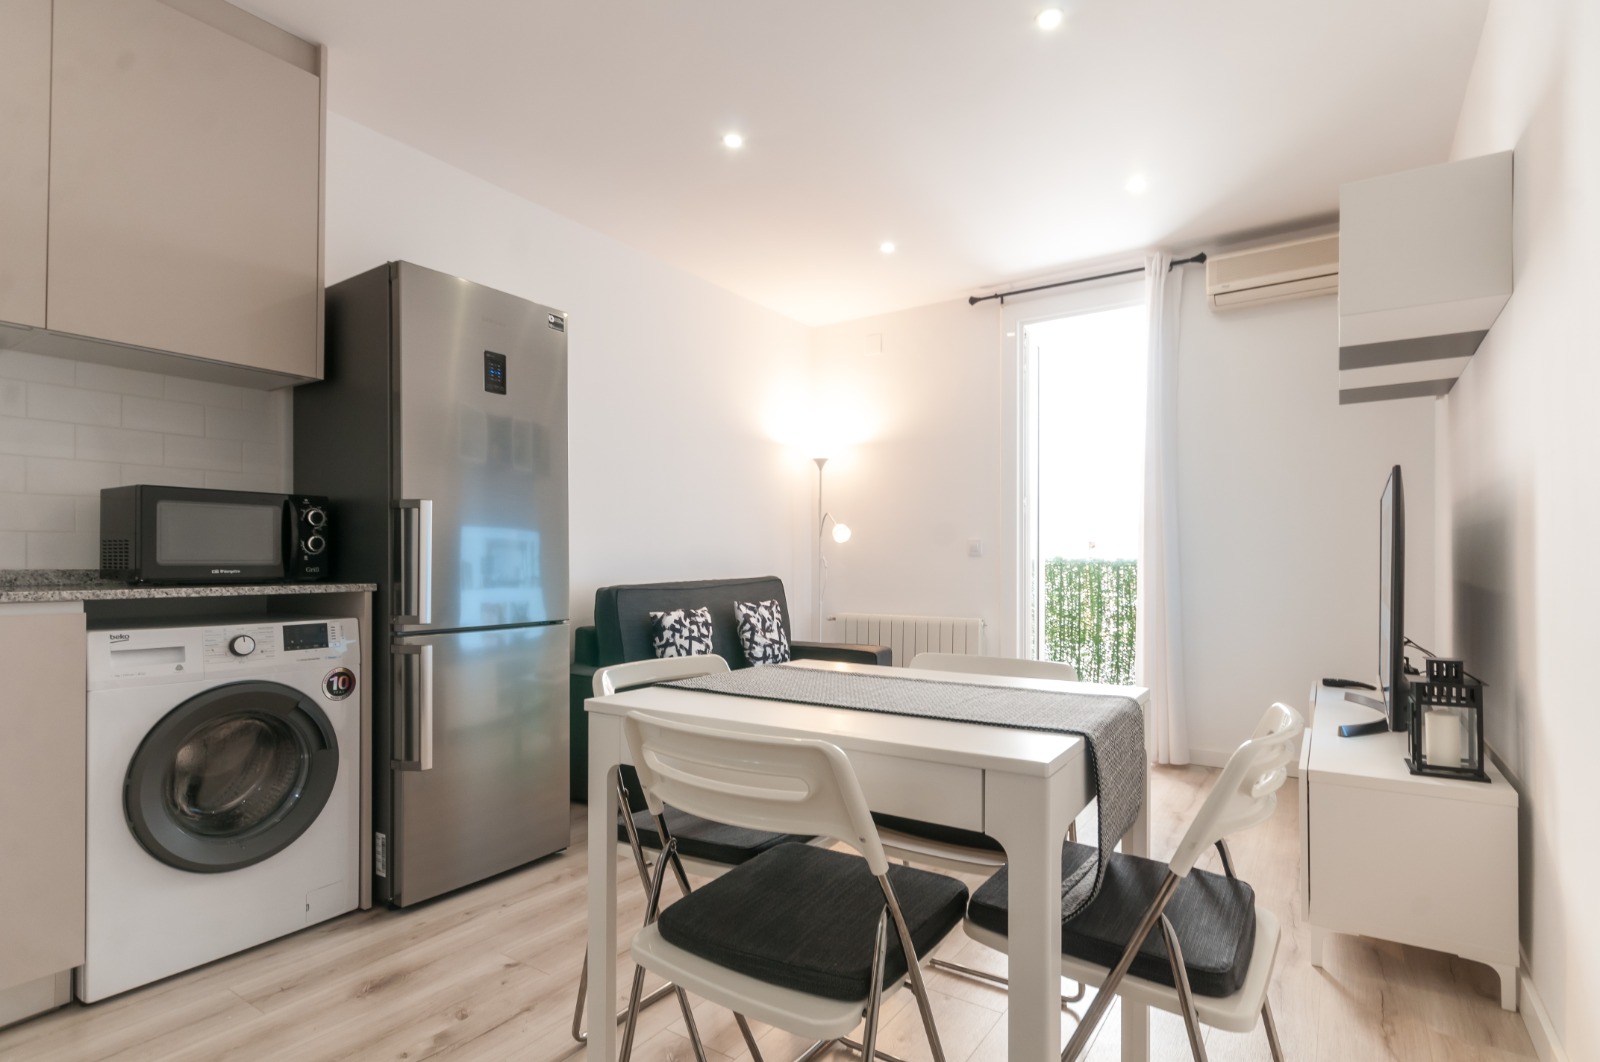 Apartment to rent in Hospitalet Barcelona by MyRentalHost